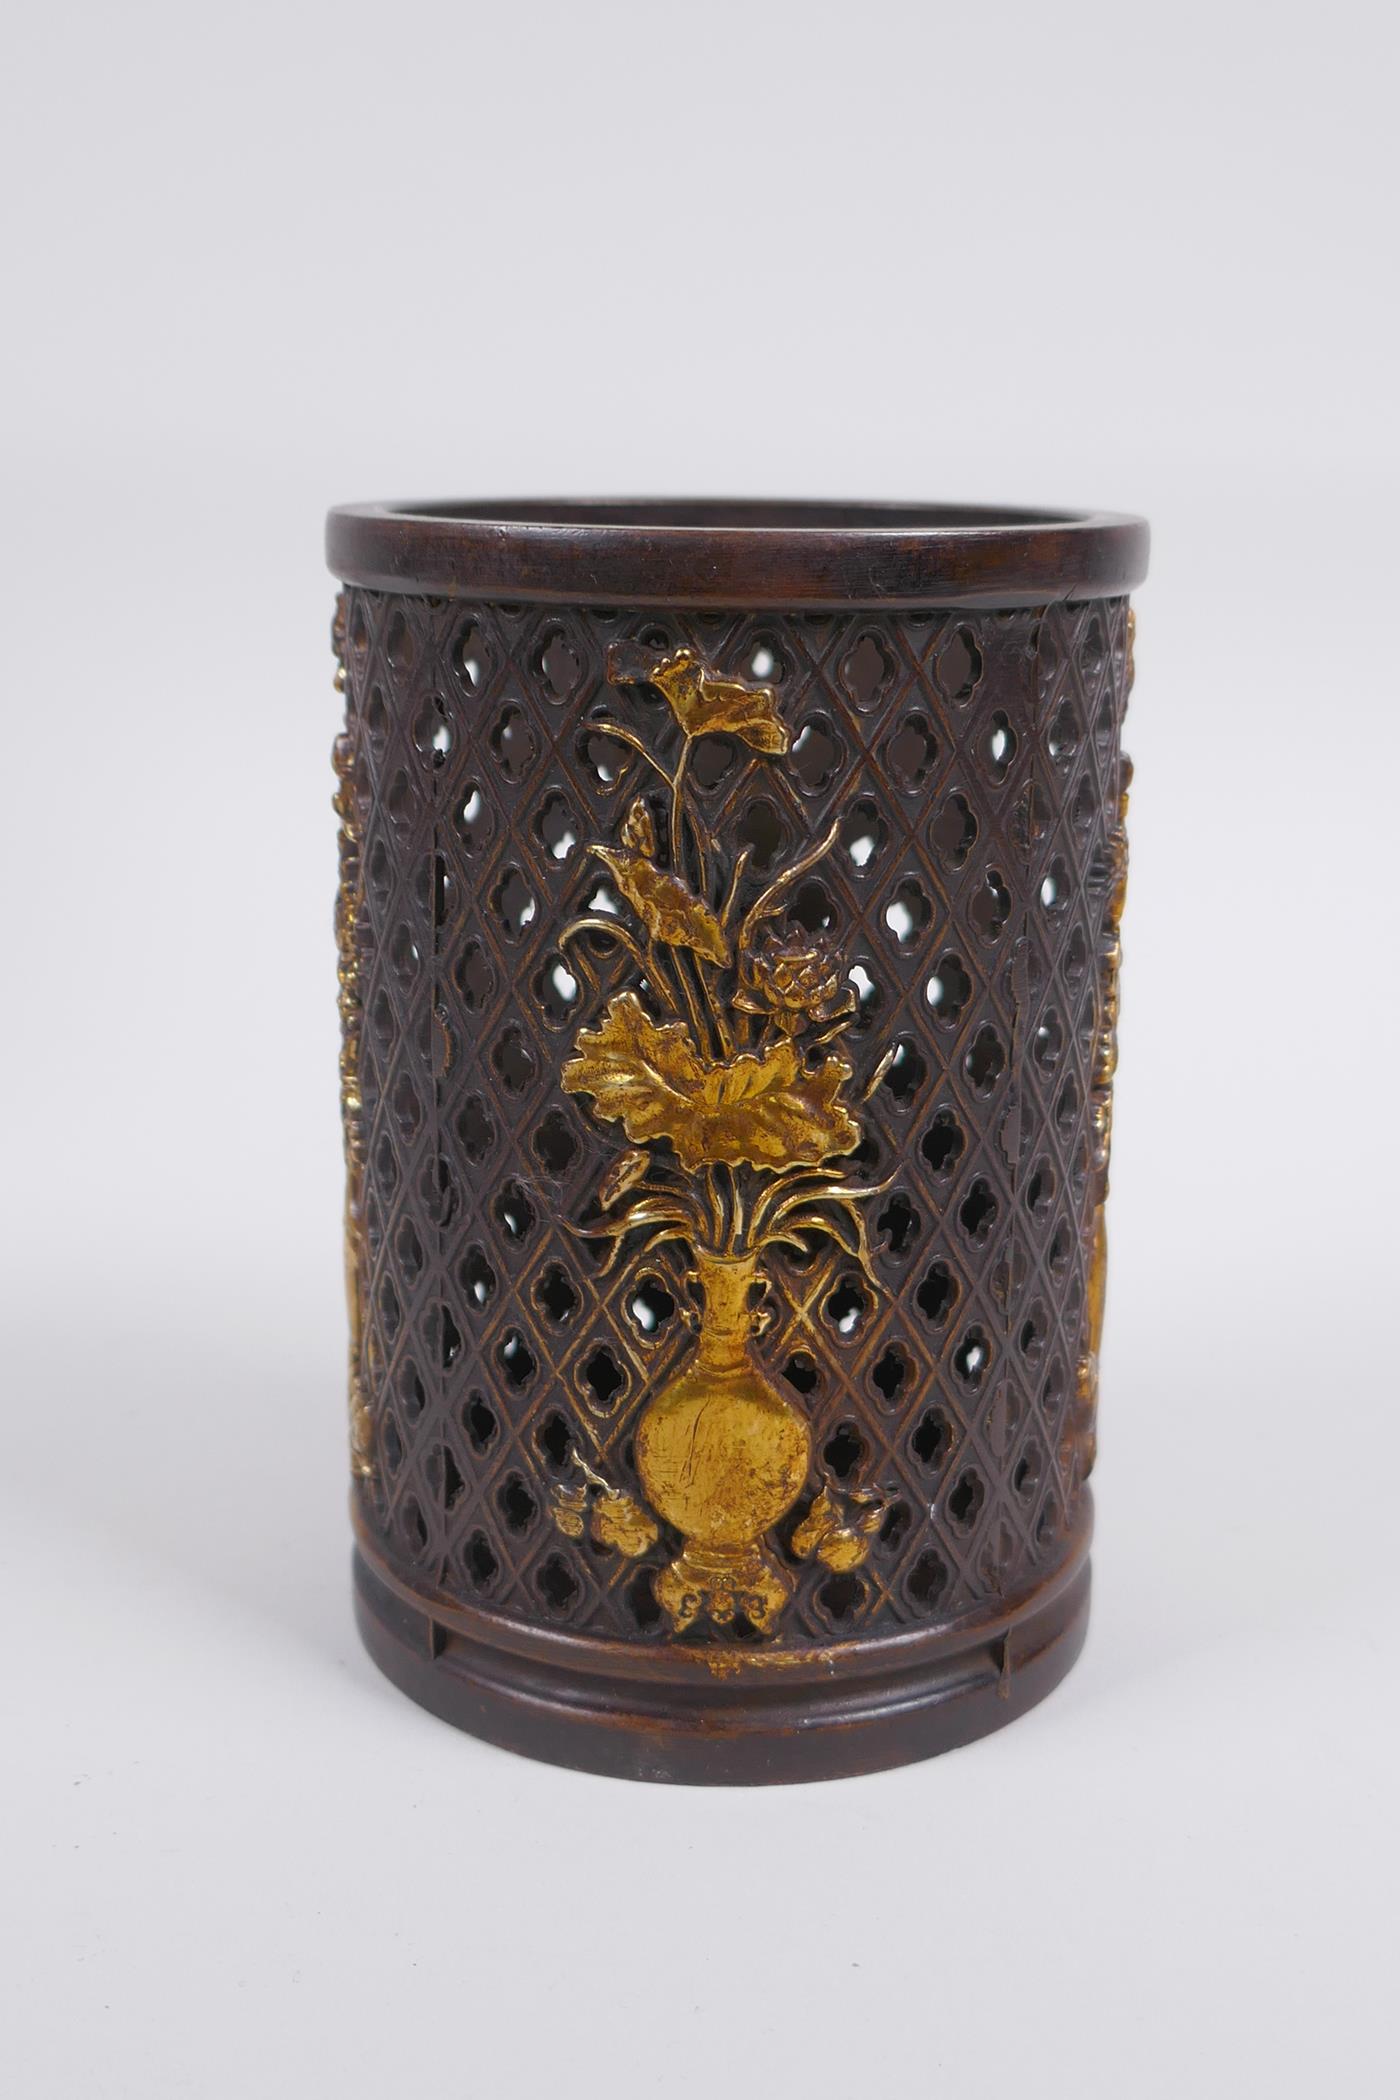 A Chinese pierced bronze brushpot decorated with flowers in vases highlighted with gilt, 12cm high x